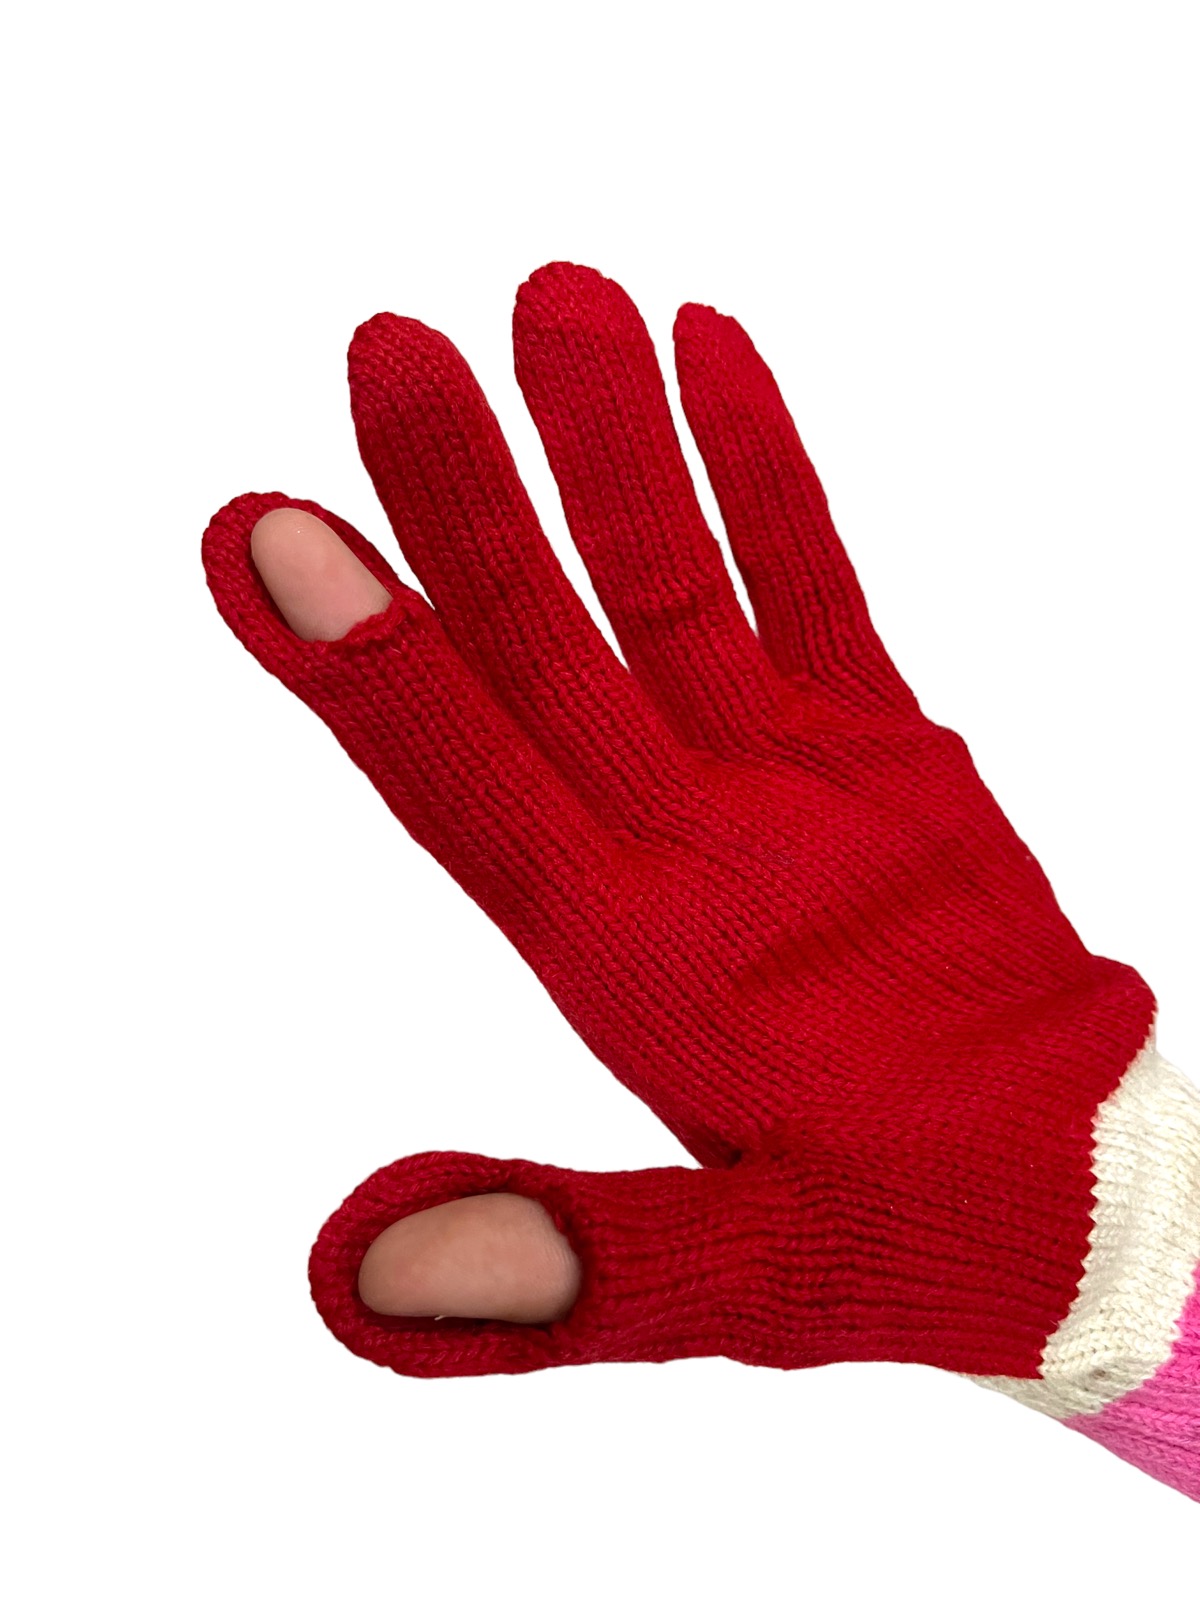 Vivienne Westwood Anglomania Gloves - 6